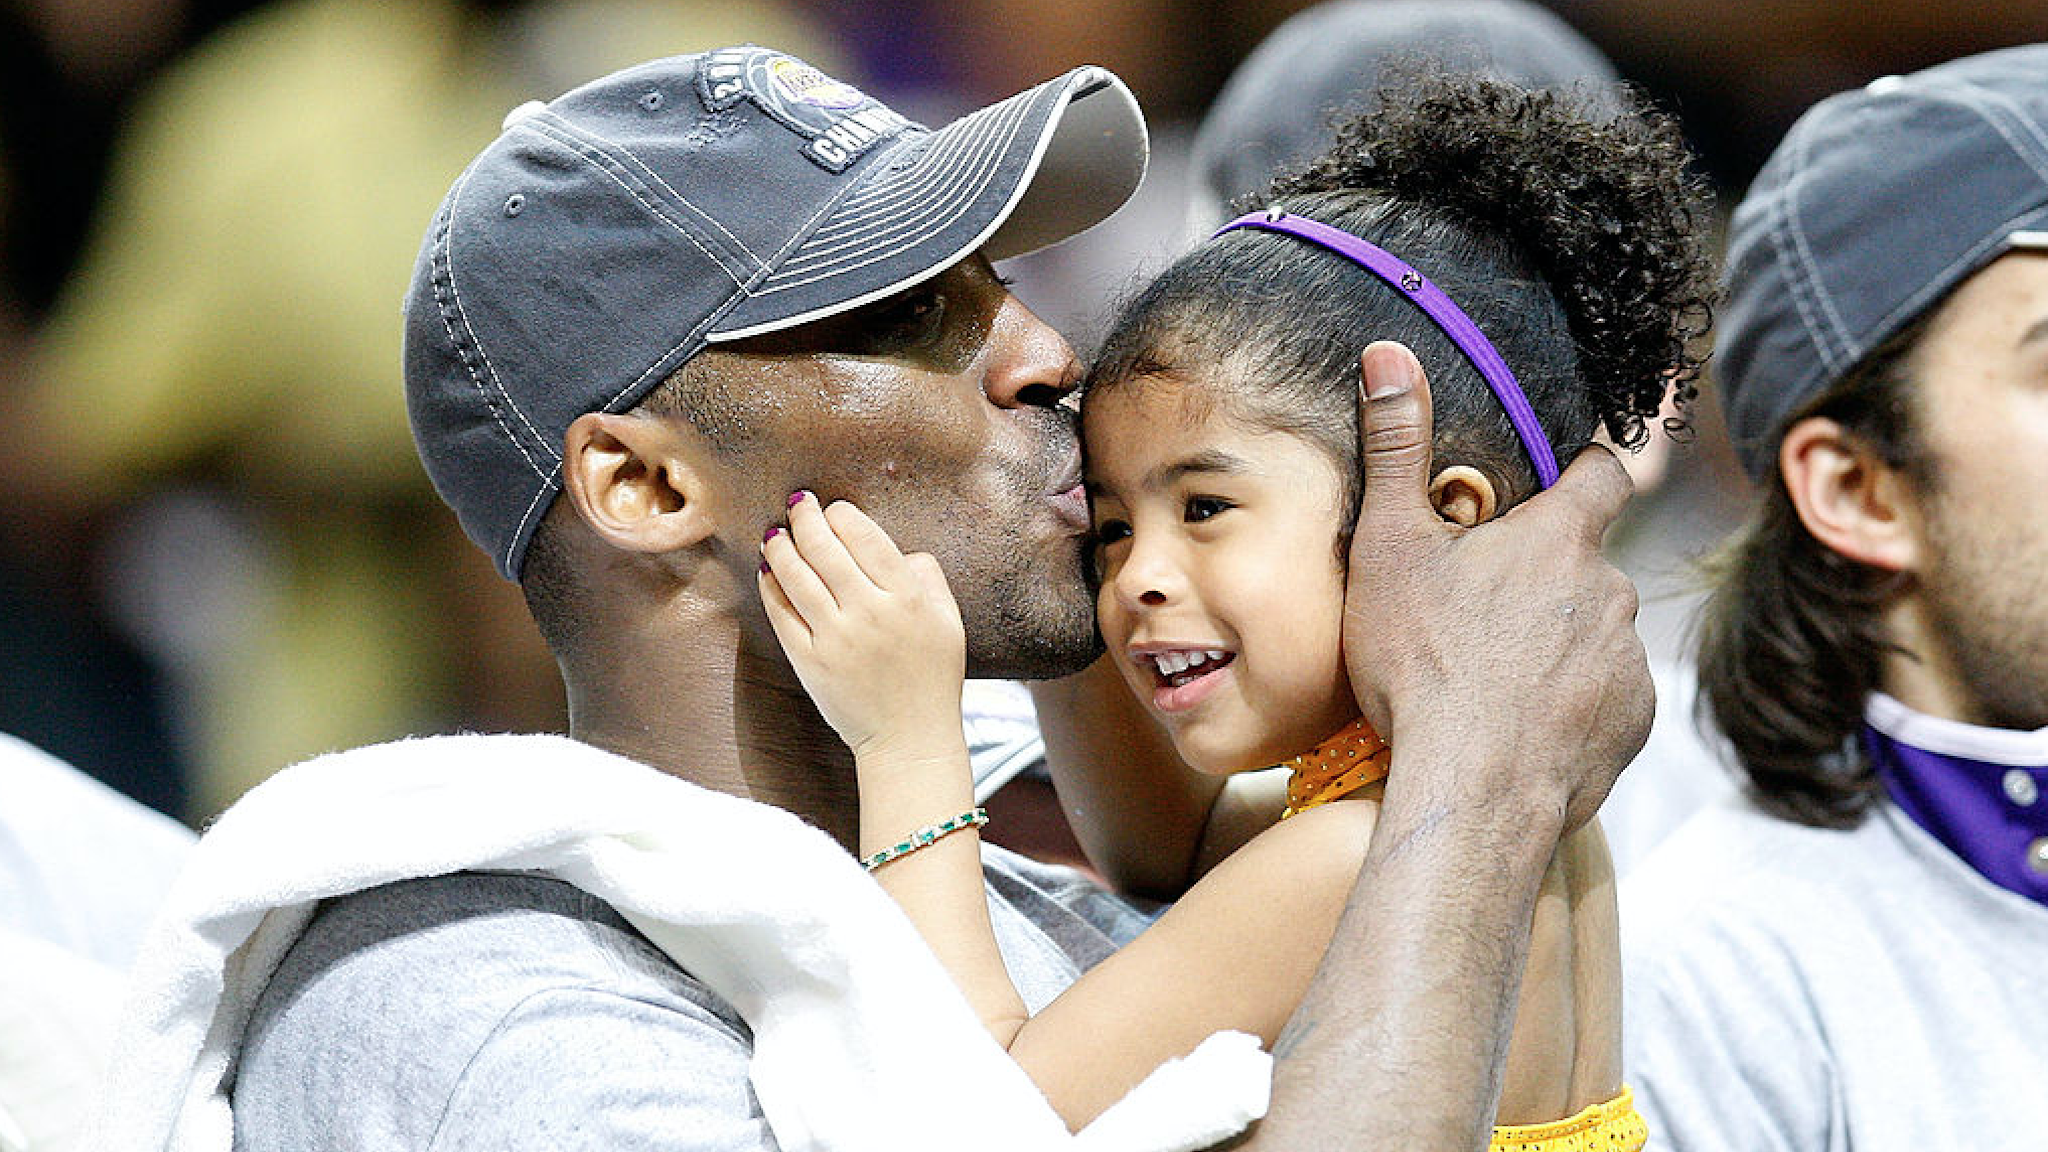 Kobe Bryant #24 of the Los Angeles Lakers kisses his daughter, Gianna, after the Lakers defeated the Orlando Magic 99-86 in Game Five of the 2009 NBA Finals on June 14, 2009 at Amway Arena in Orlando, Florida.